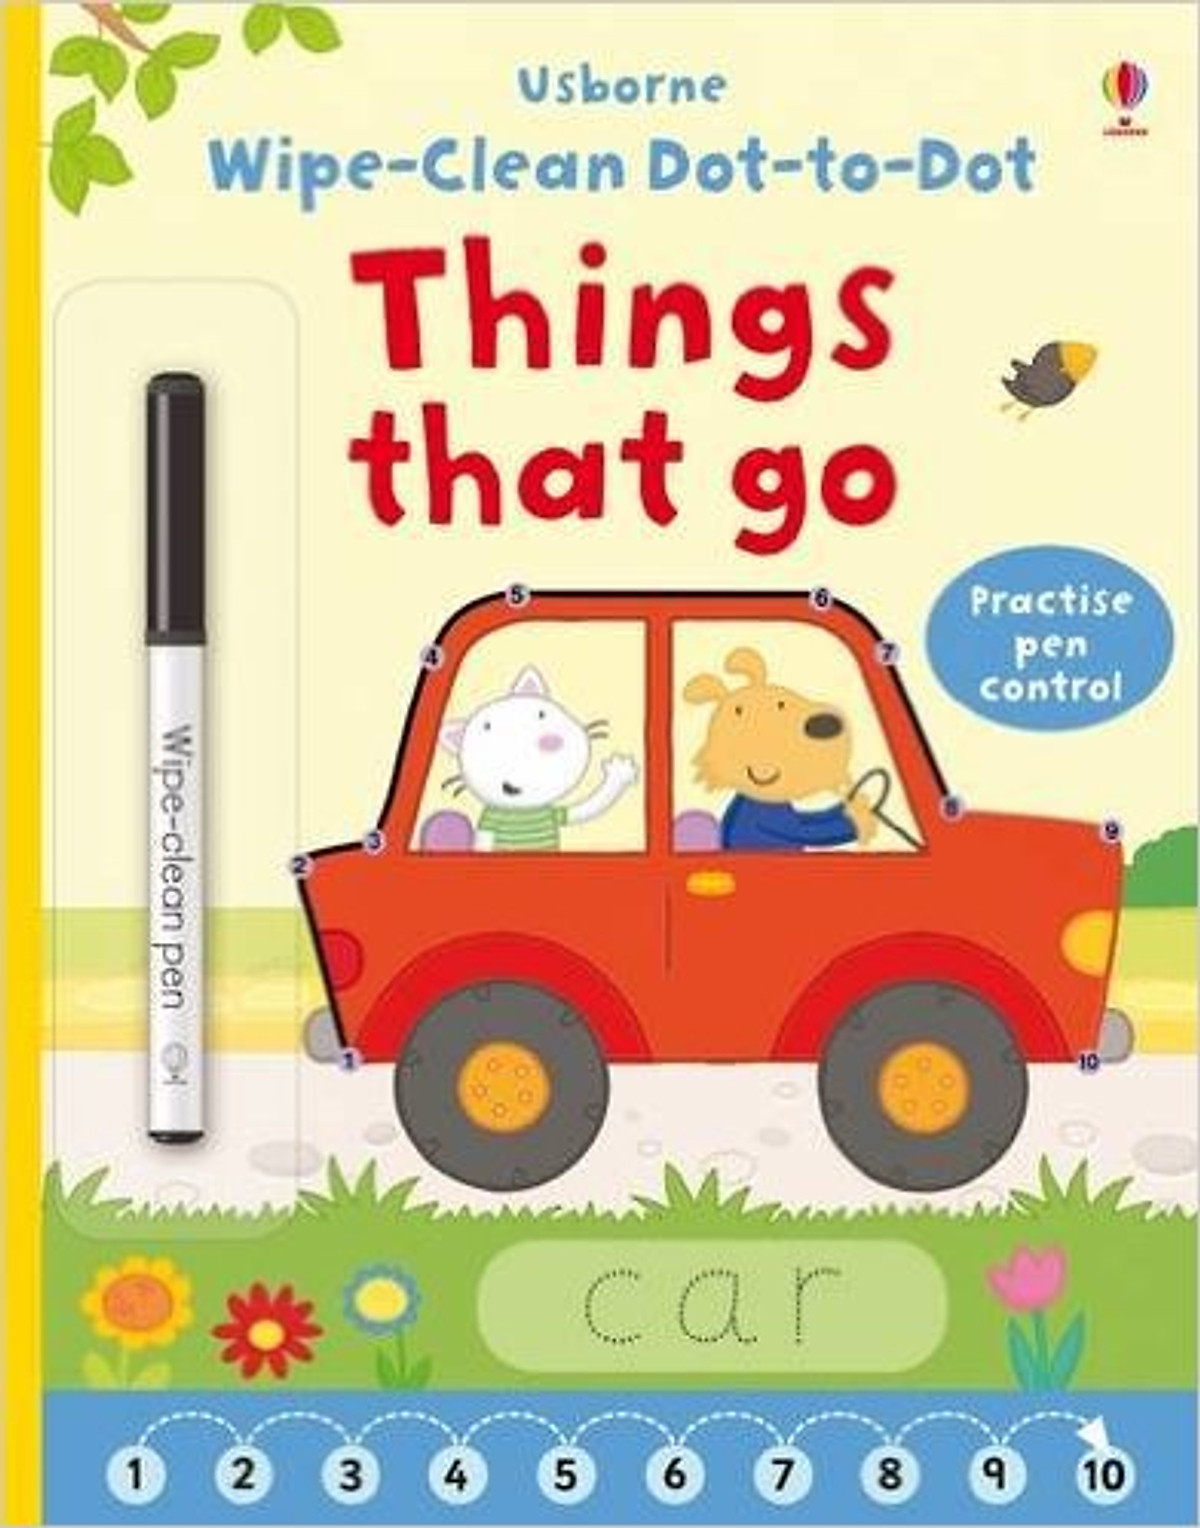 Usborne Dot-to-Dot Things that go